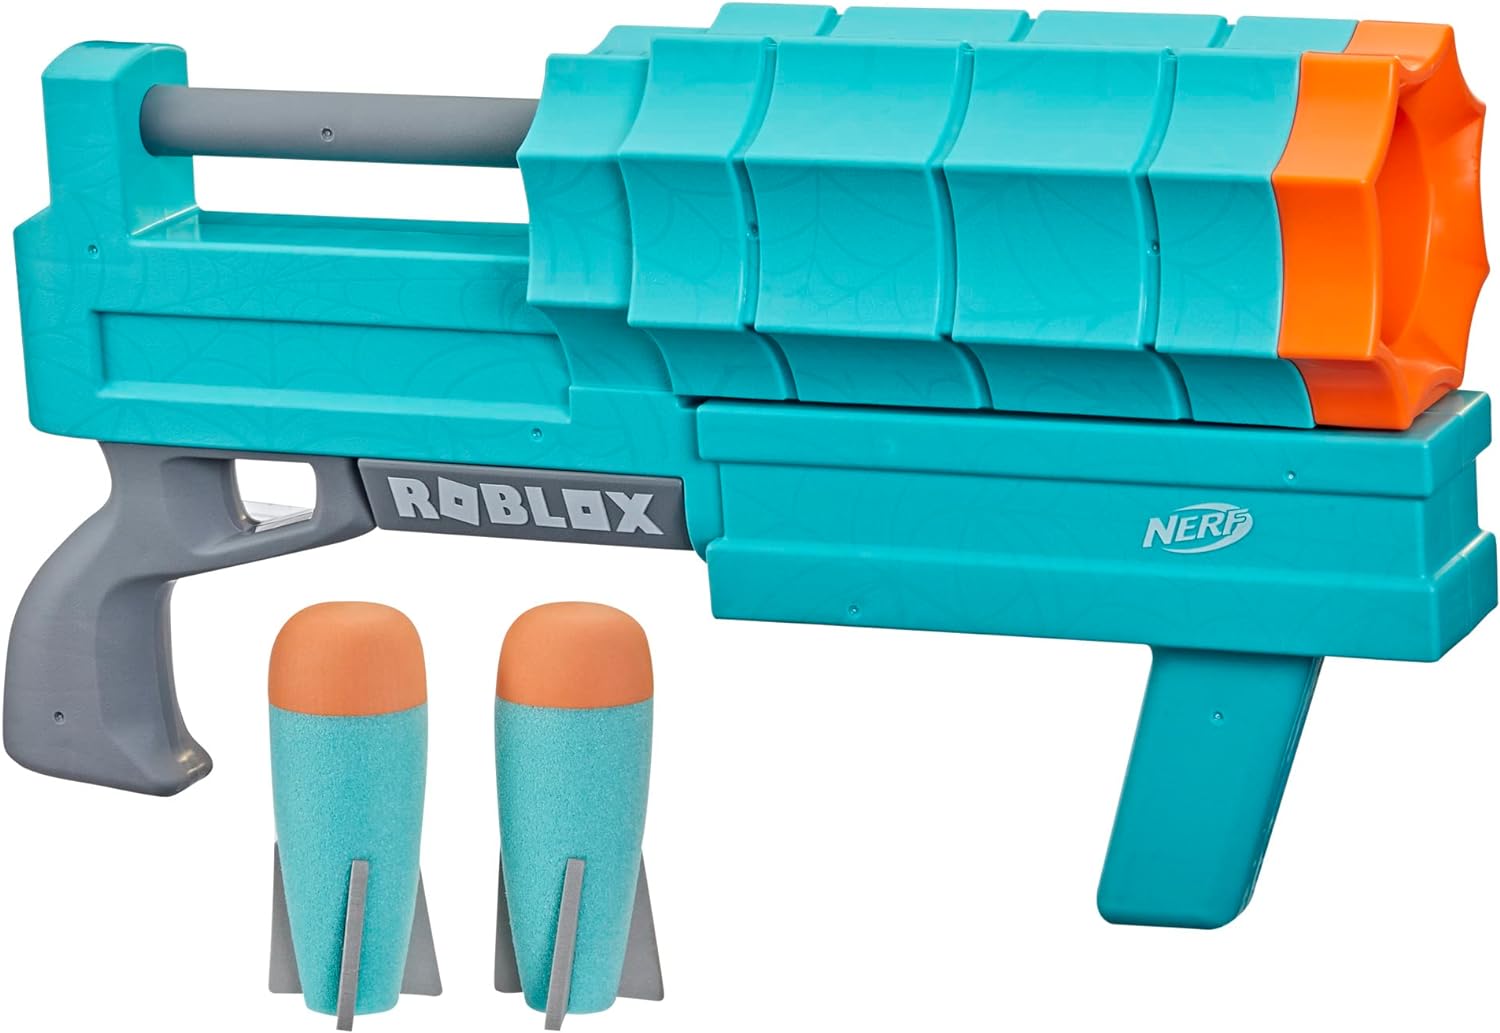 Great for any age since its super easy to load and prime. And, how hard it hits depends on what the person firing it can put in.So, for a small kid its a bit huge, but they work it themselves and its not going to hurt their other small friends. Id get a pile of these for a party.For big kids or adults this can shoot straight and far. The only downside is I wish it was easier to get more ammo. Rockets for this cost quite a bit. Also, it has a little play in the priming mechanism, so I do 